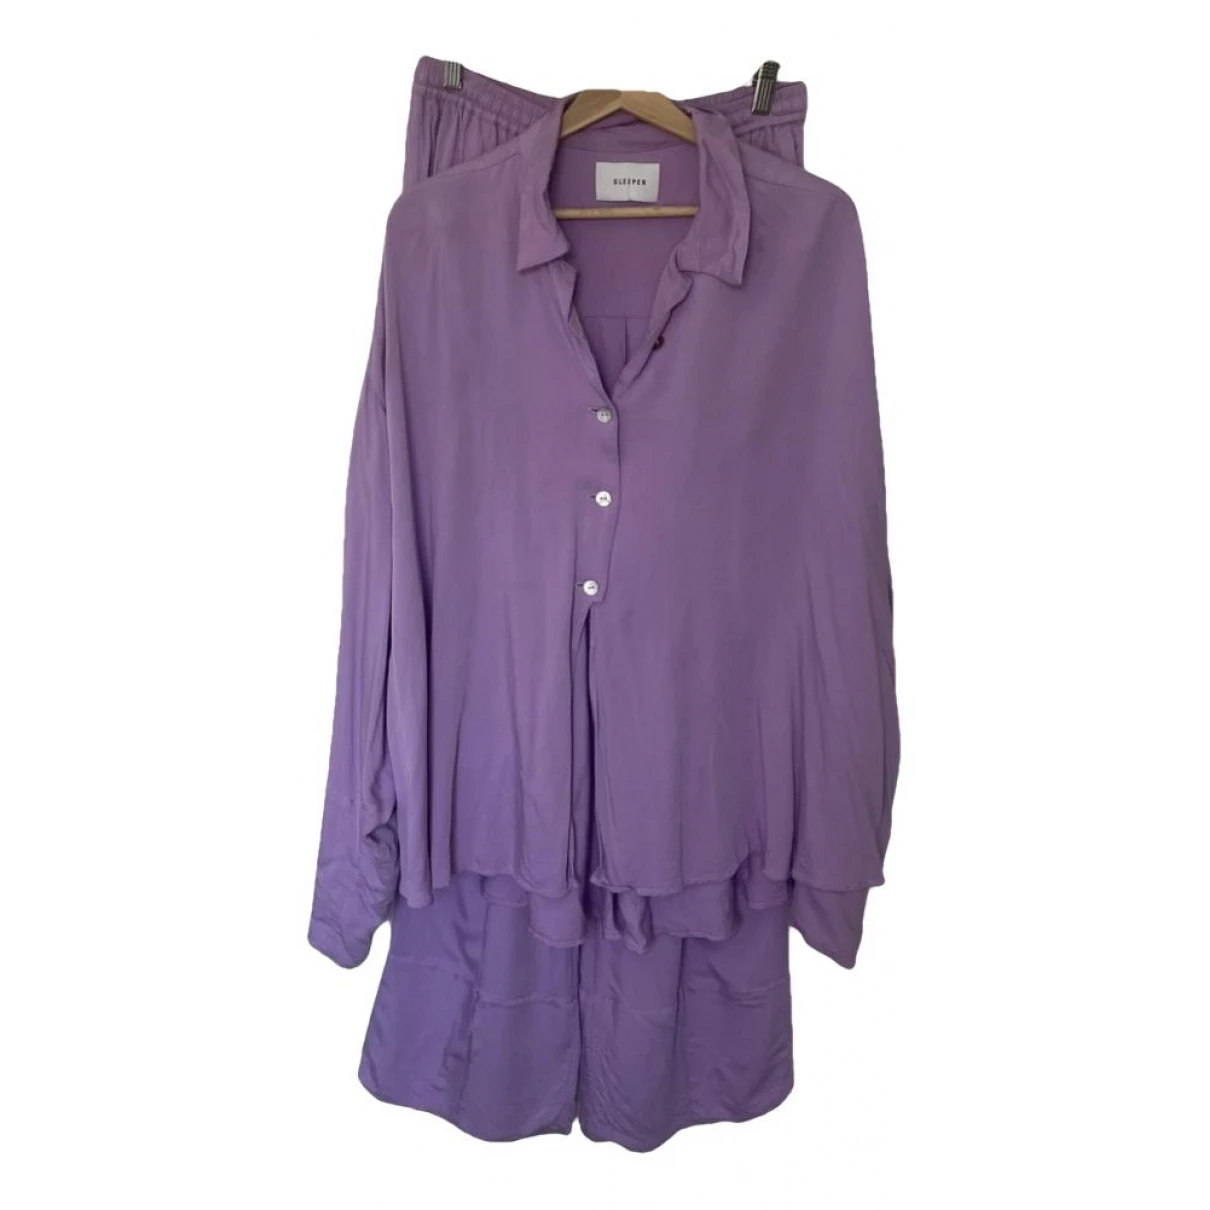 clothing Sleeper jumpsuits for Female Cotton 8 UK. Used condition